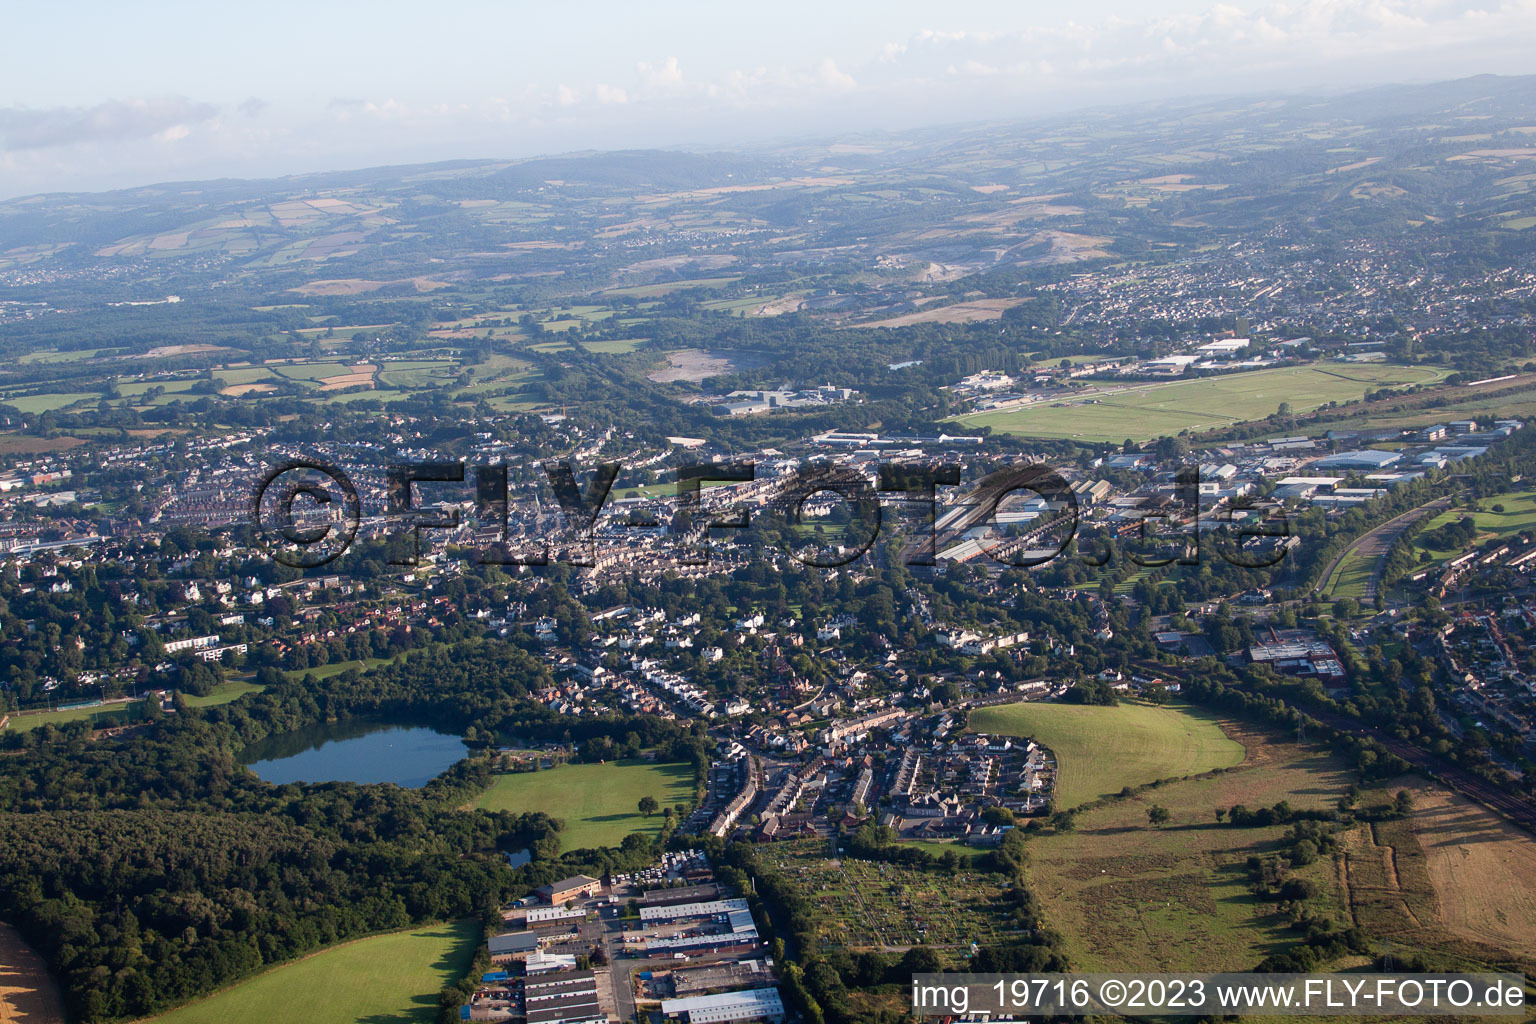 Kingskerswell in the state England, Great Britain from the plane